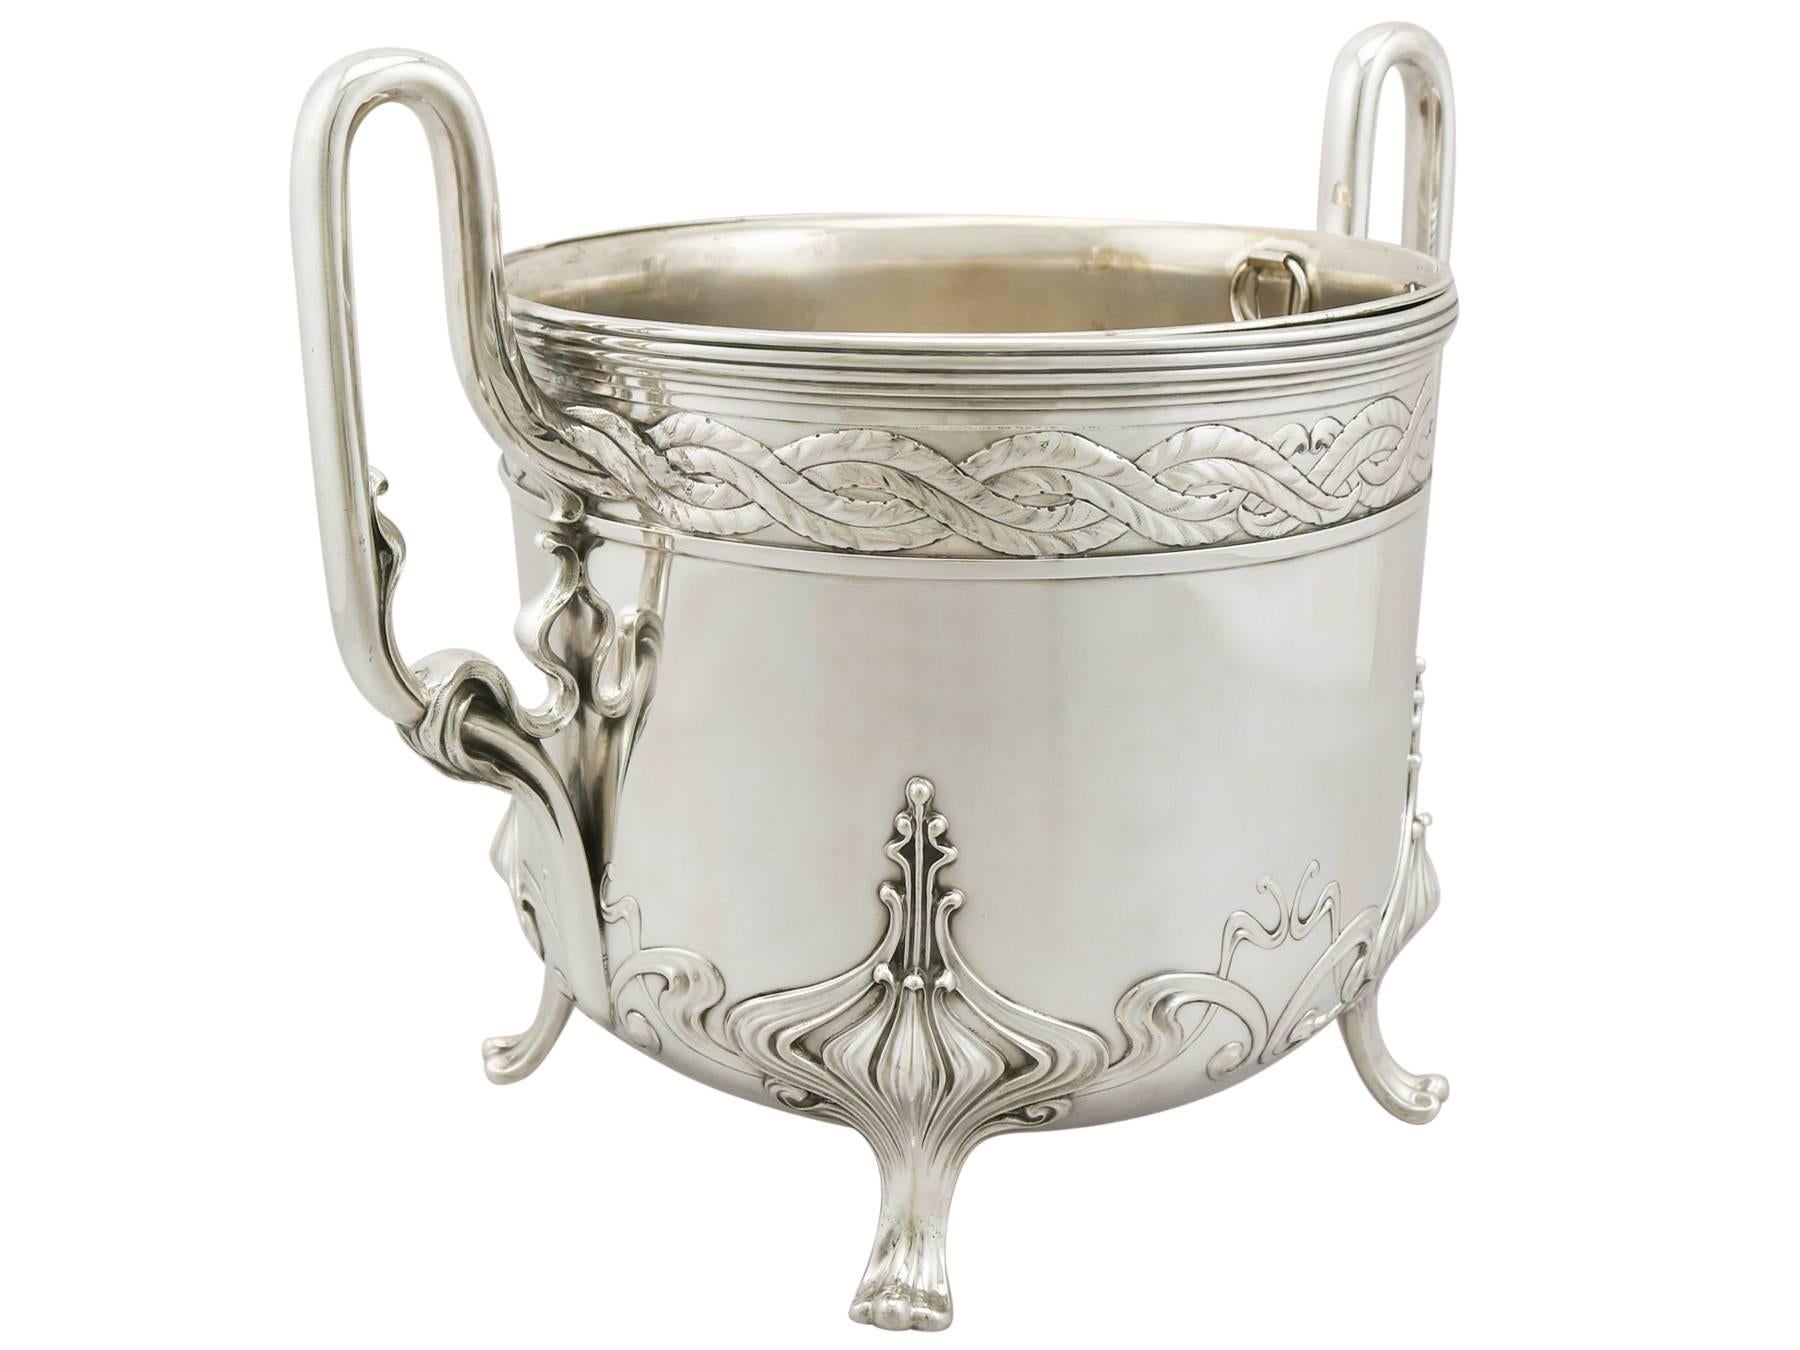 An exceptional, fine and impressive antique German 800 standard silver wine/champagne cooler in the Art Nouveau style; an addition to our presentation silverware collection.

This exceptional antique German silver wine cooler has a circular